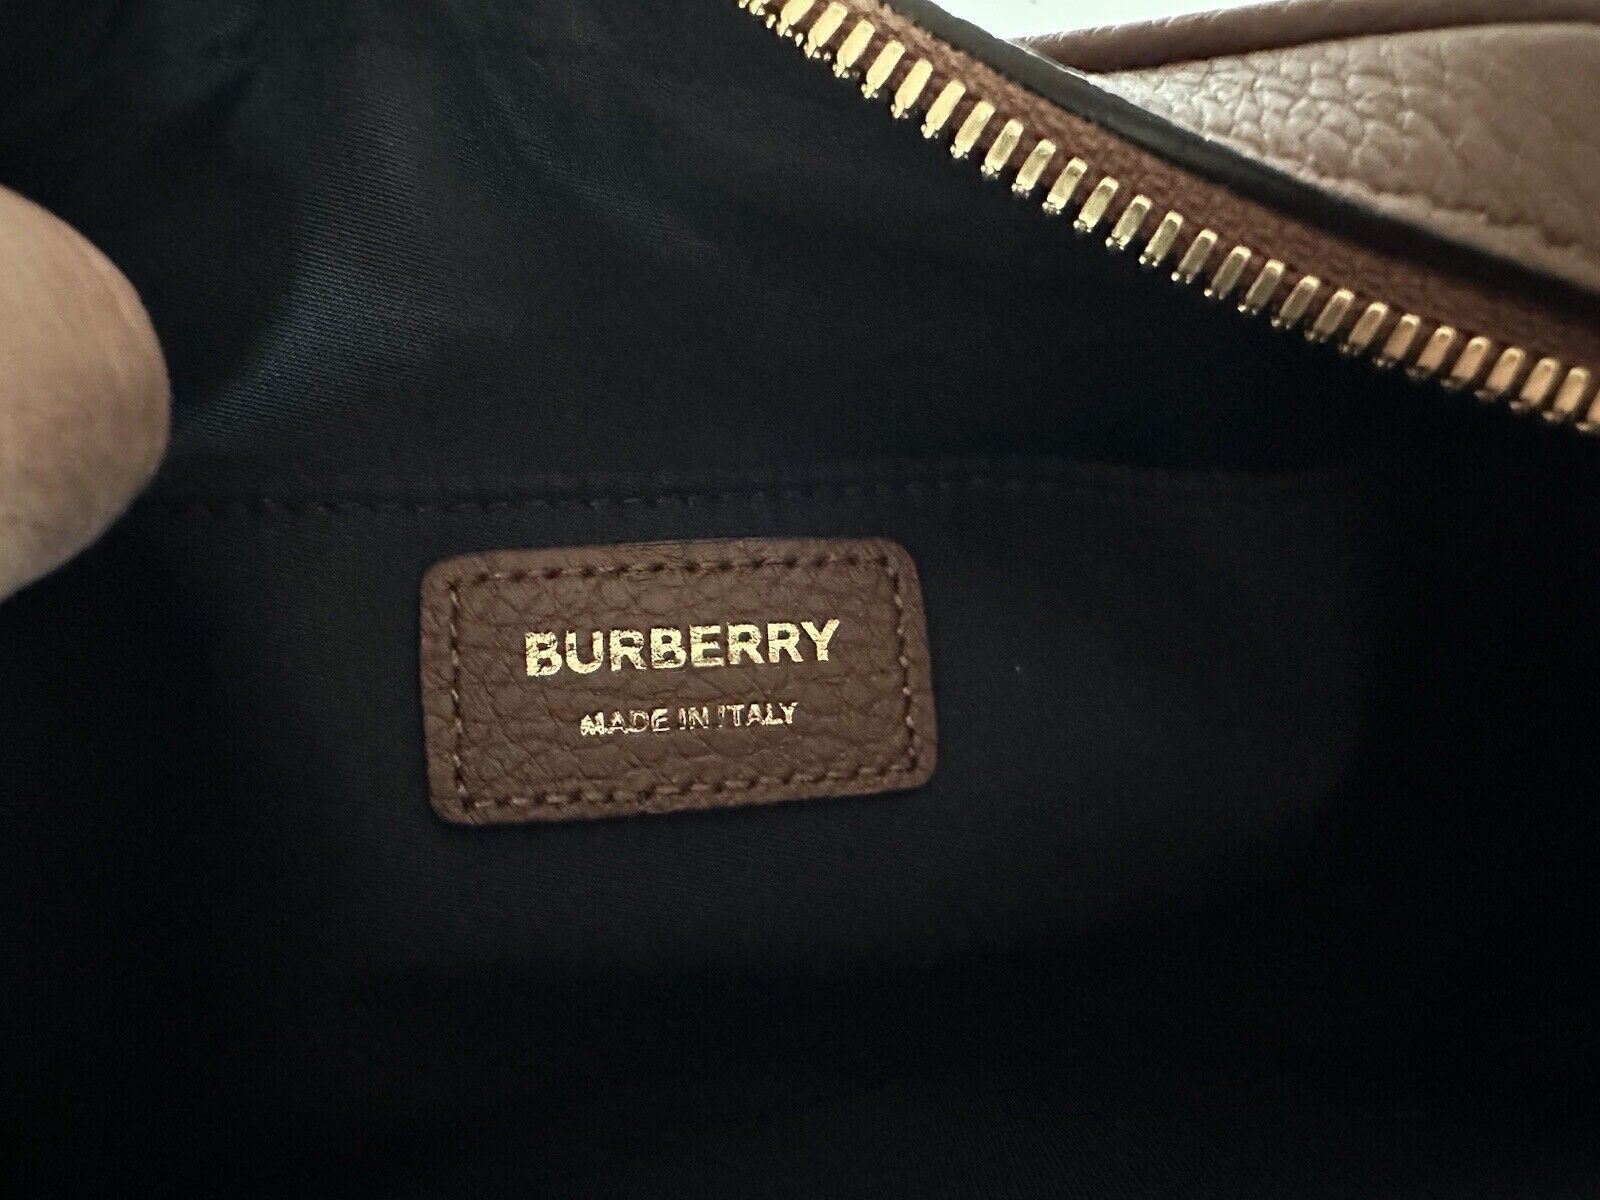 NWT $900 Burberry Small Leather Camera Shoulder Bag Tan Made in Italy 8061571